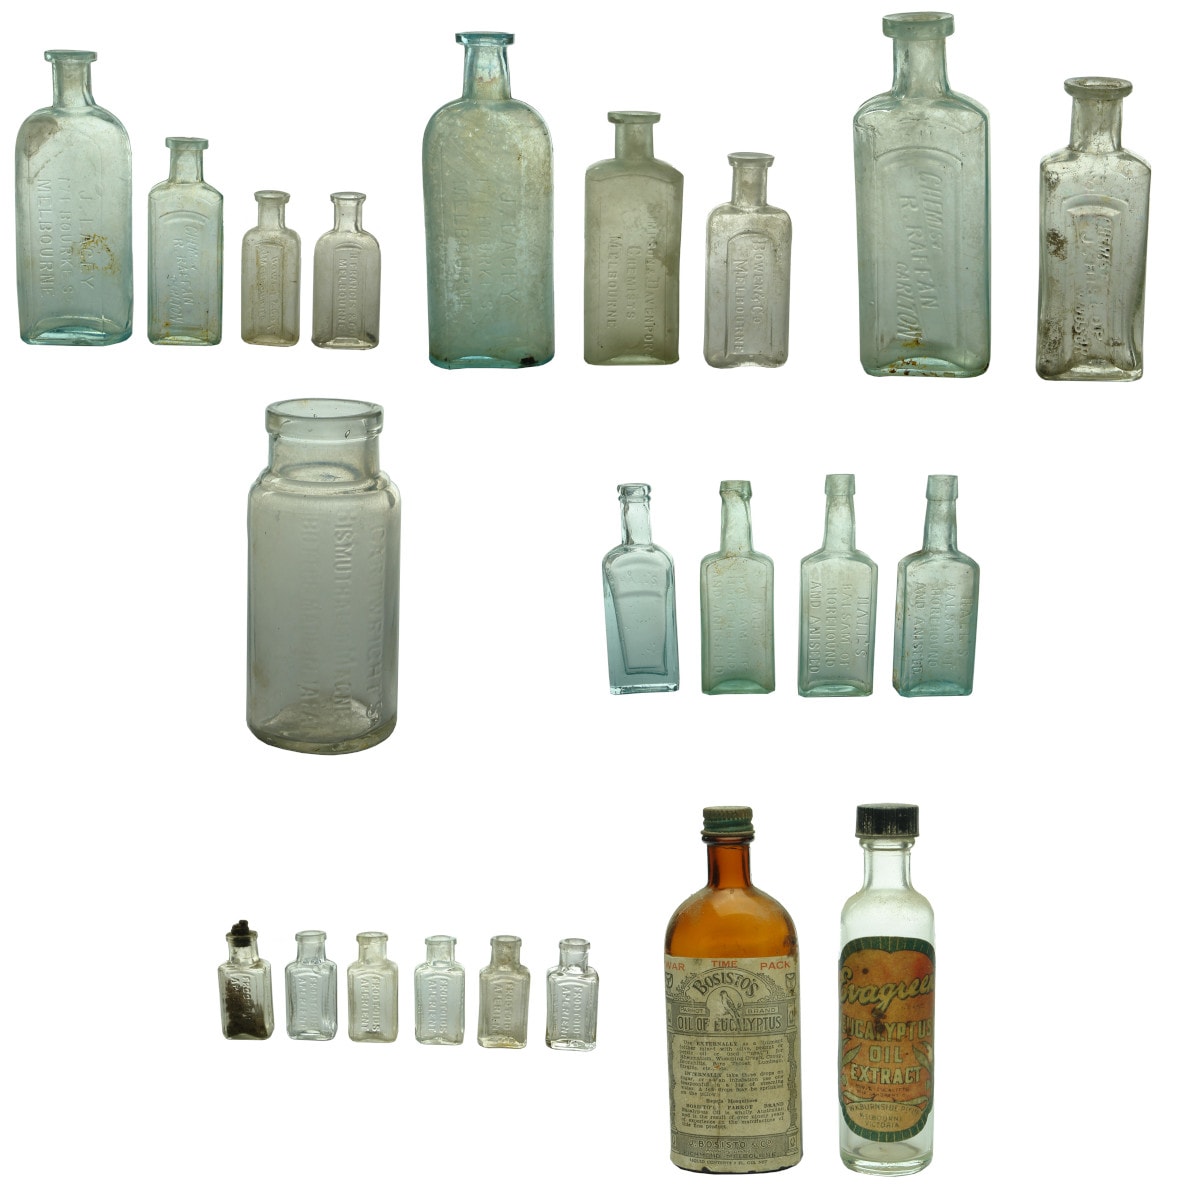 22 Chemist & Medical type bottles: 9 x Melbourne Chemists; Cartwrights Magnesia; 4 x Hall's Cure bottles; 6 x Hearne's Frootoids; 2 labelled Eucalyptus.